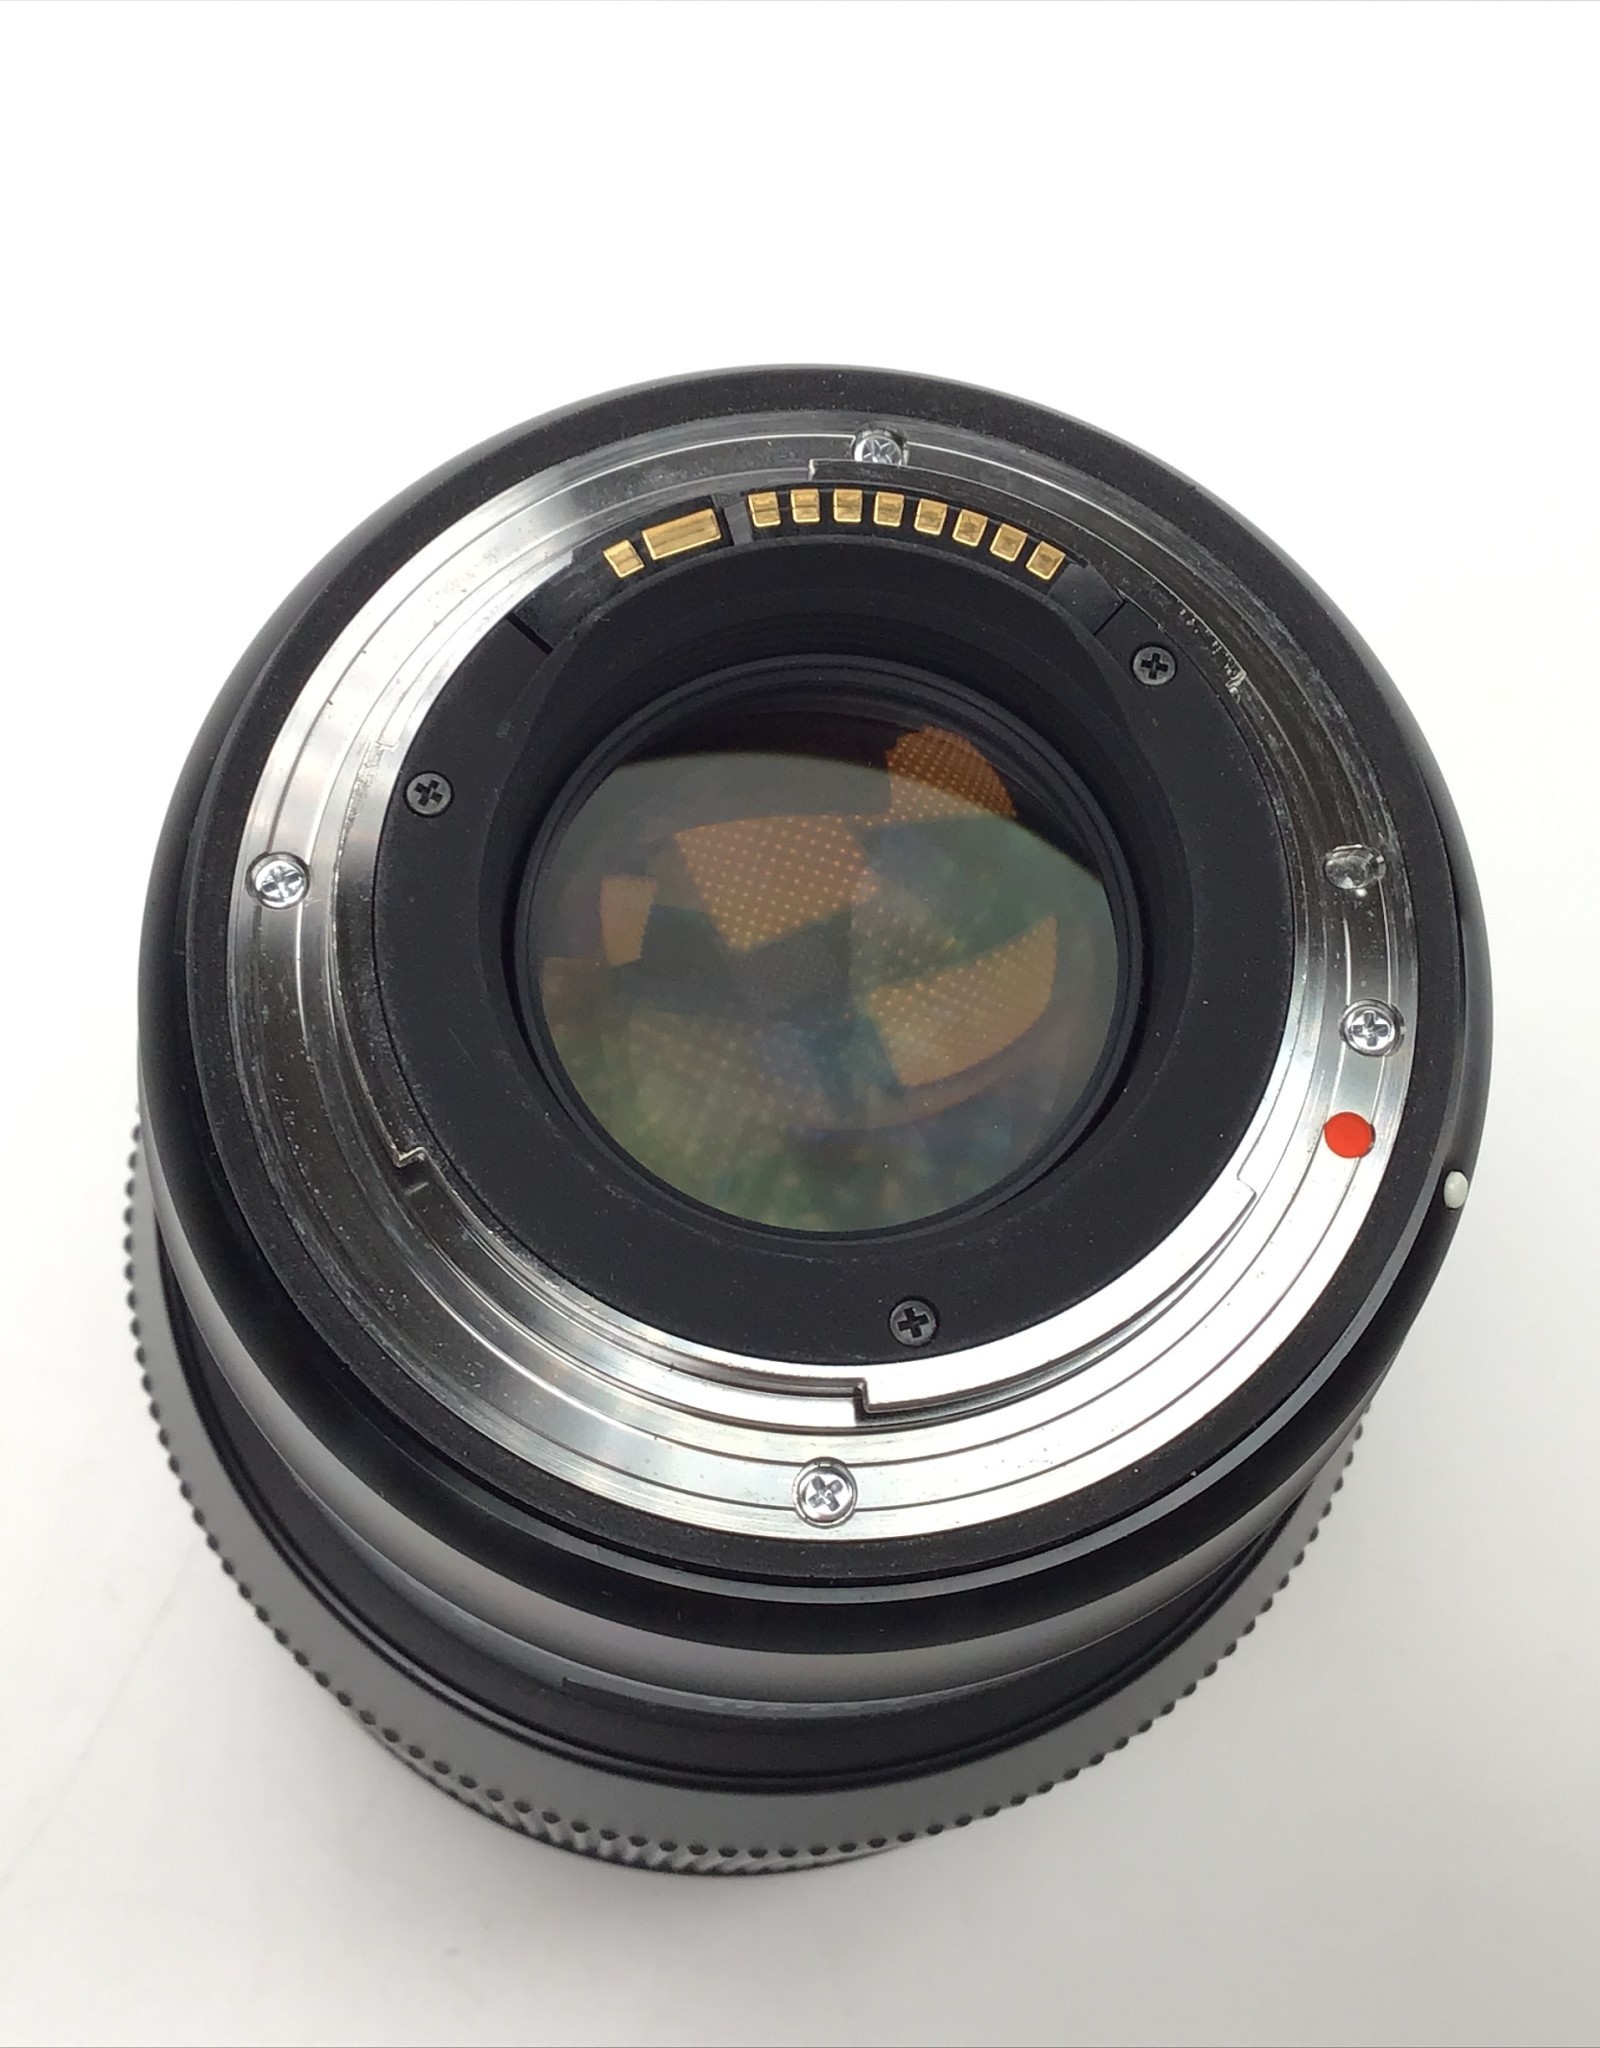 SIGMA Sigma 85mm f1.4 DG Lens for Canon Used Good